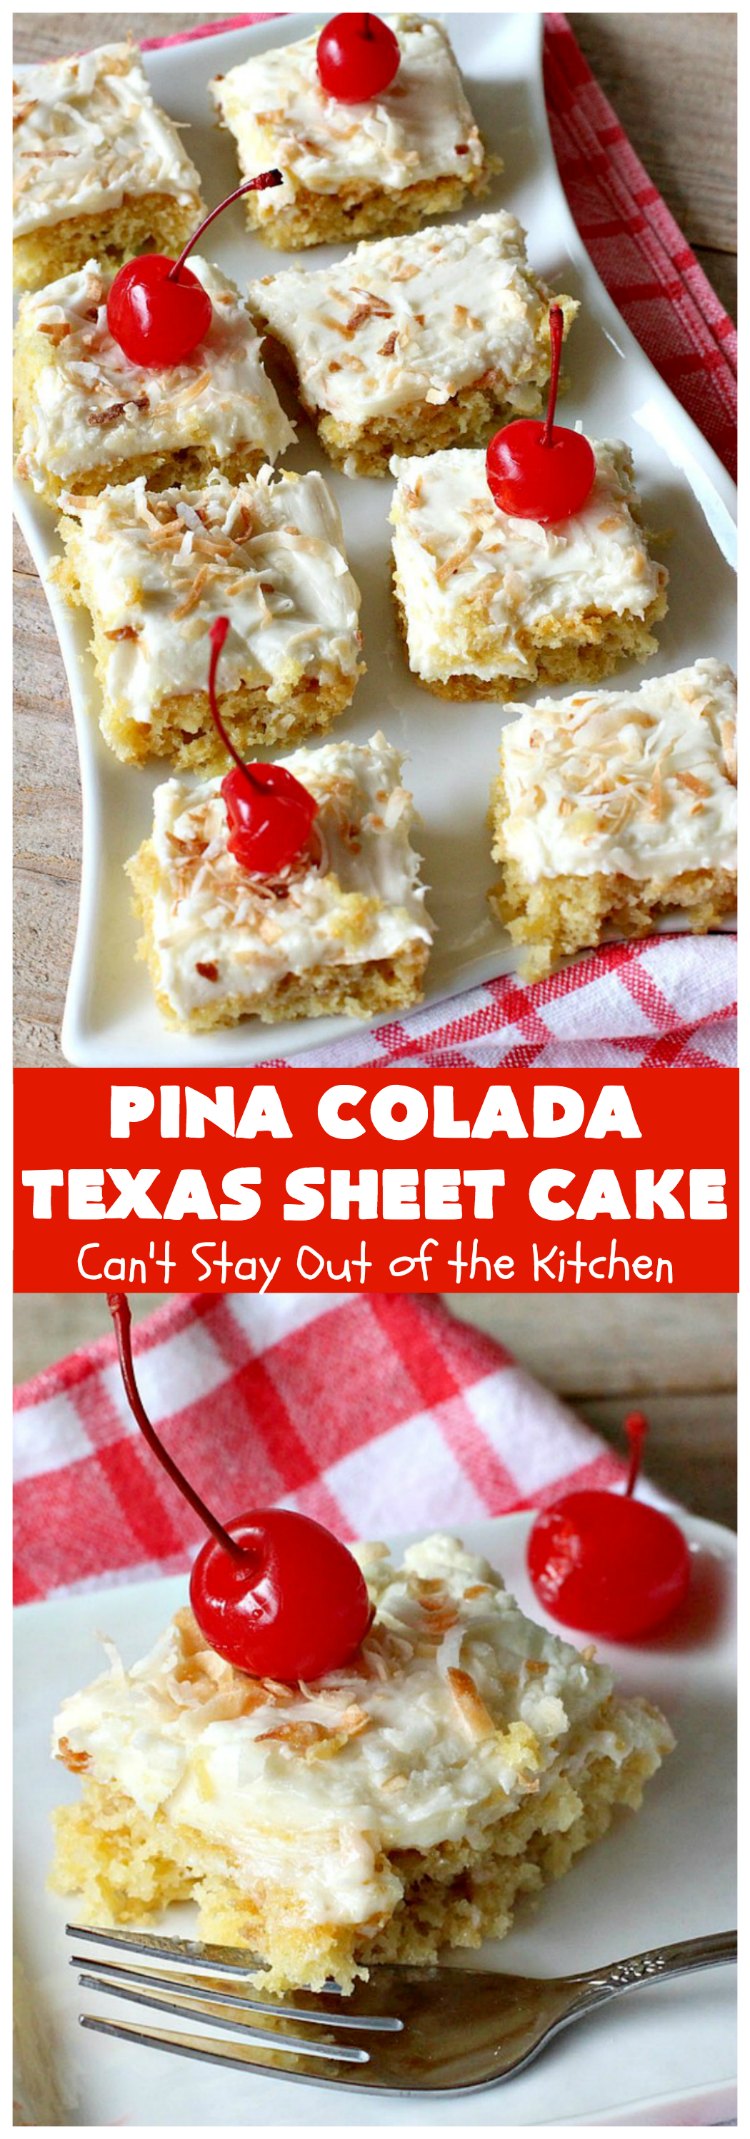 Pina Colada Texas Sheet Cake | Can't Stay Out of the Kitchen | This fantastic #cake is filled with #Pineapple & #coconut for fantastic #PinaColada flavors. The #CreamCheese icing is to die for! It's easy to make & terrific for a #holiday #dessert like #Christmas. #HolidayDessert #PineappleDessert #PinaColadaDessert #TexasSheetCake #PinaColadaTexasSheetCake